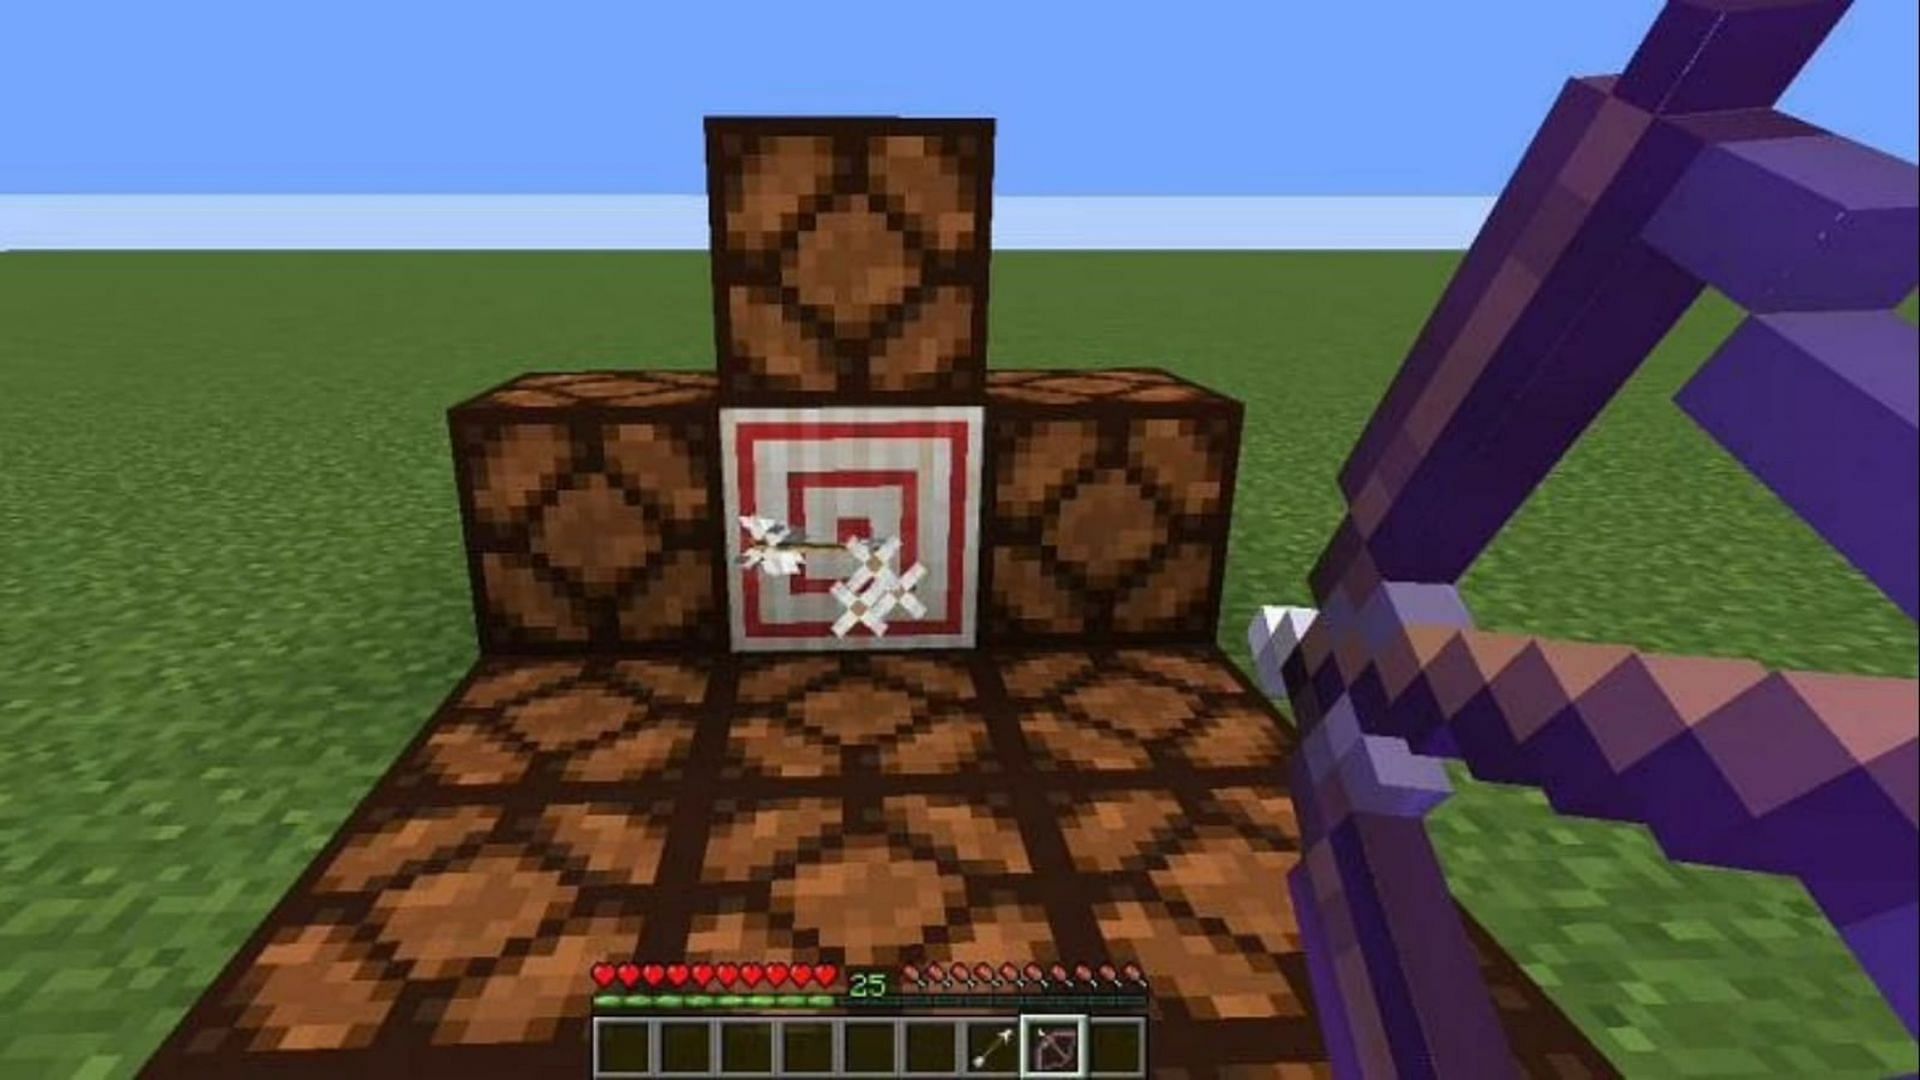 Infinity makes one arrow; all players need to continue firing their bow (Image via Mojang)